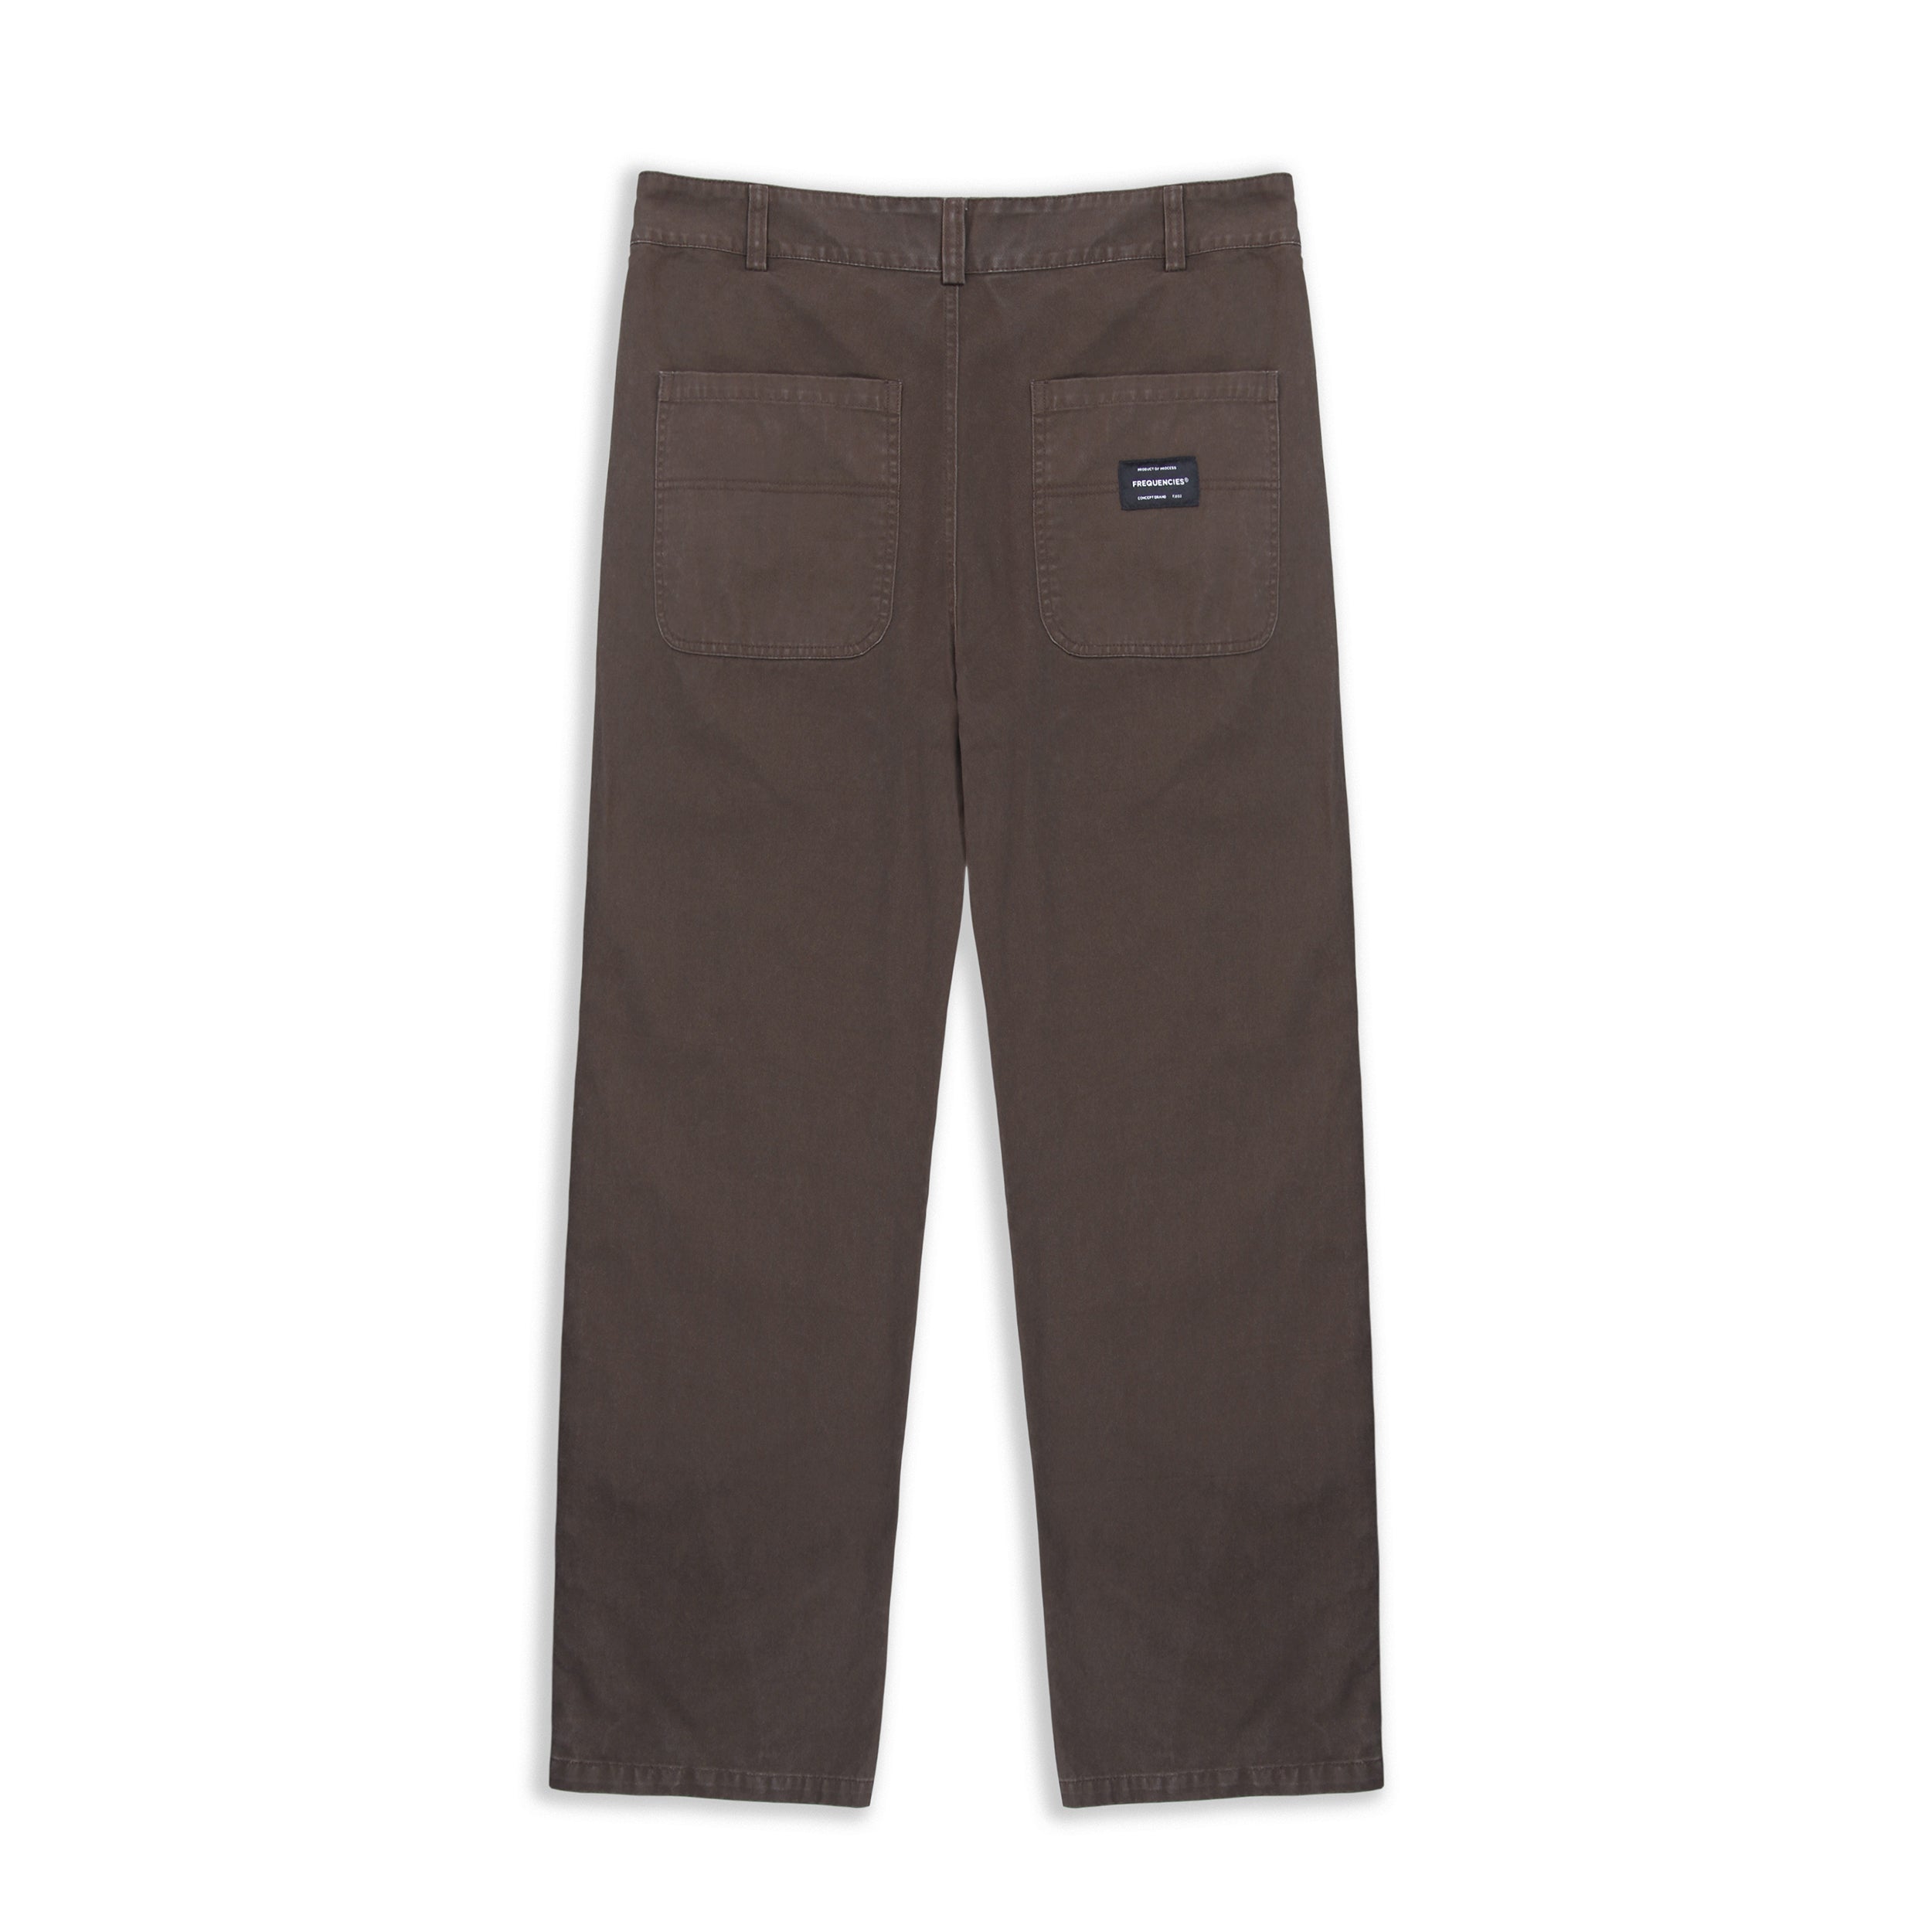 PHASER PANT - FADED BROWN